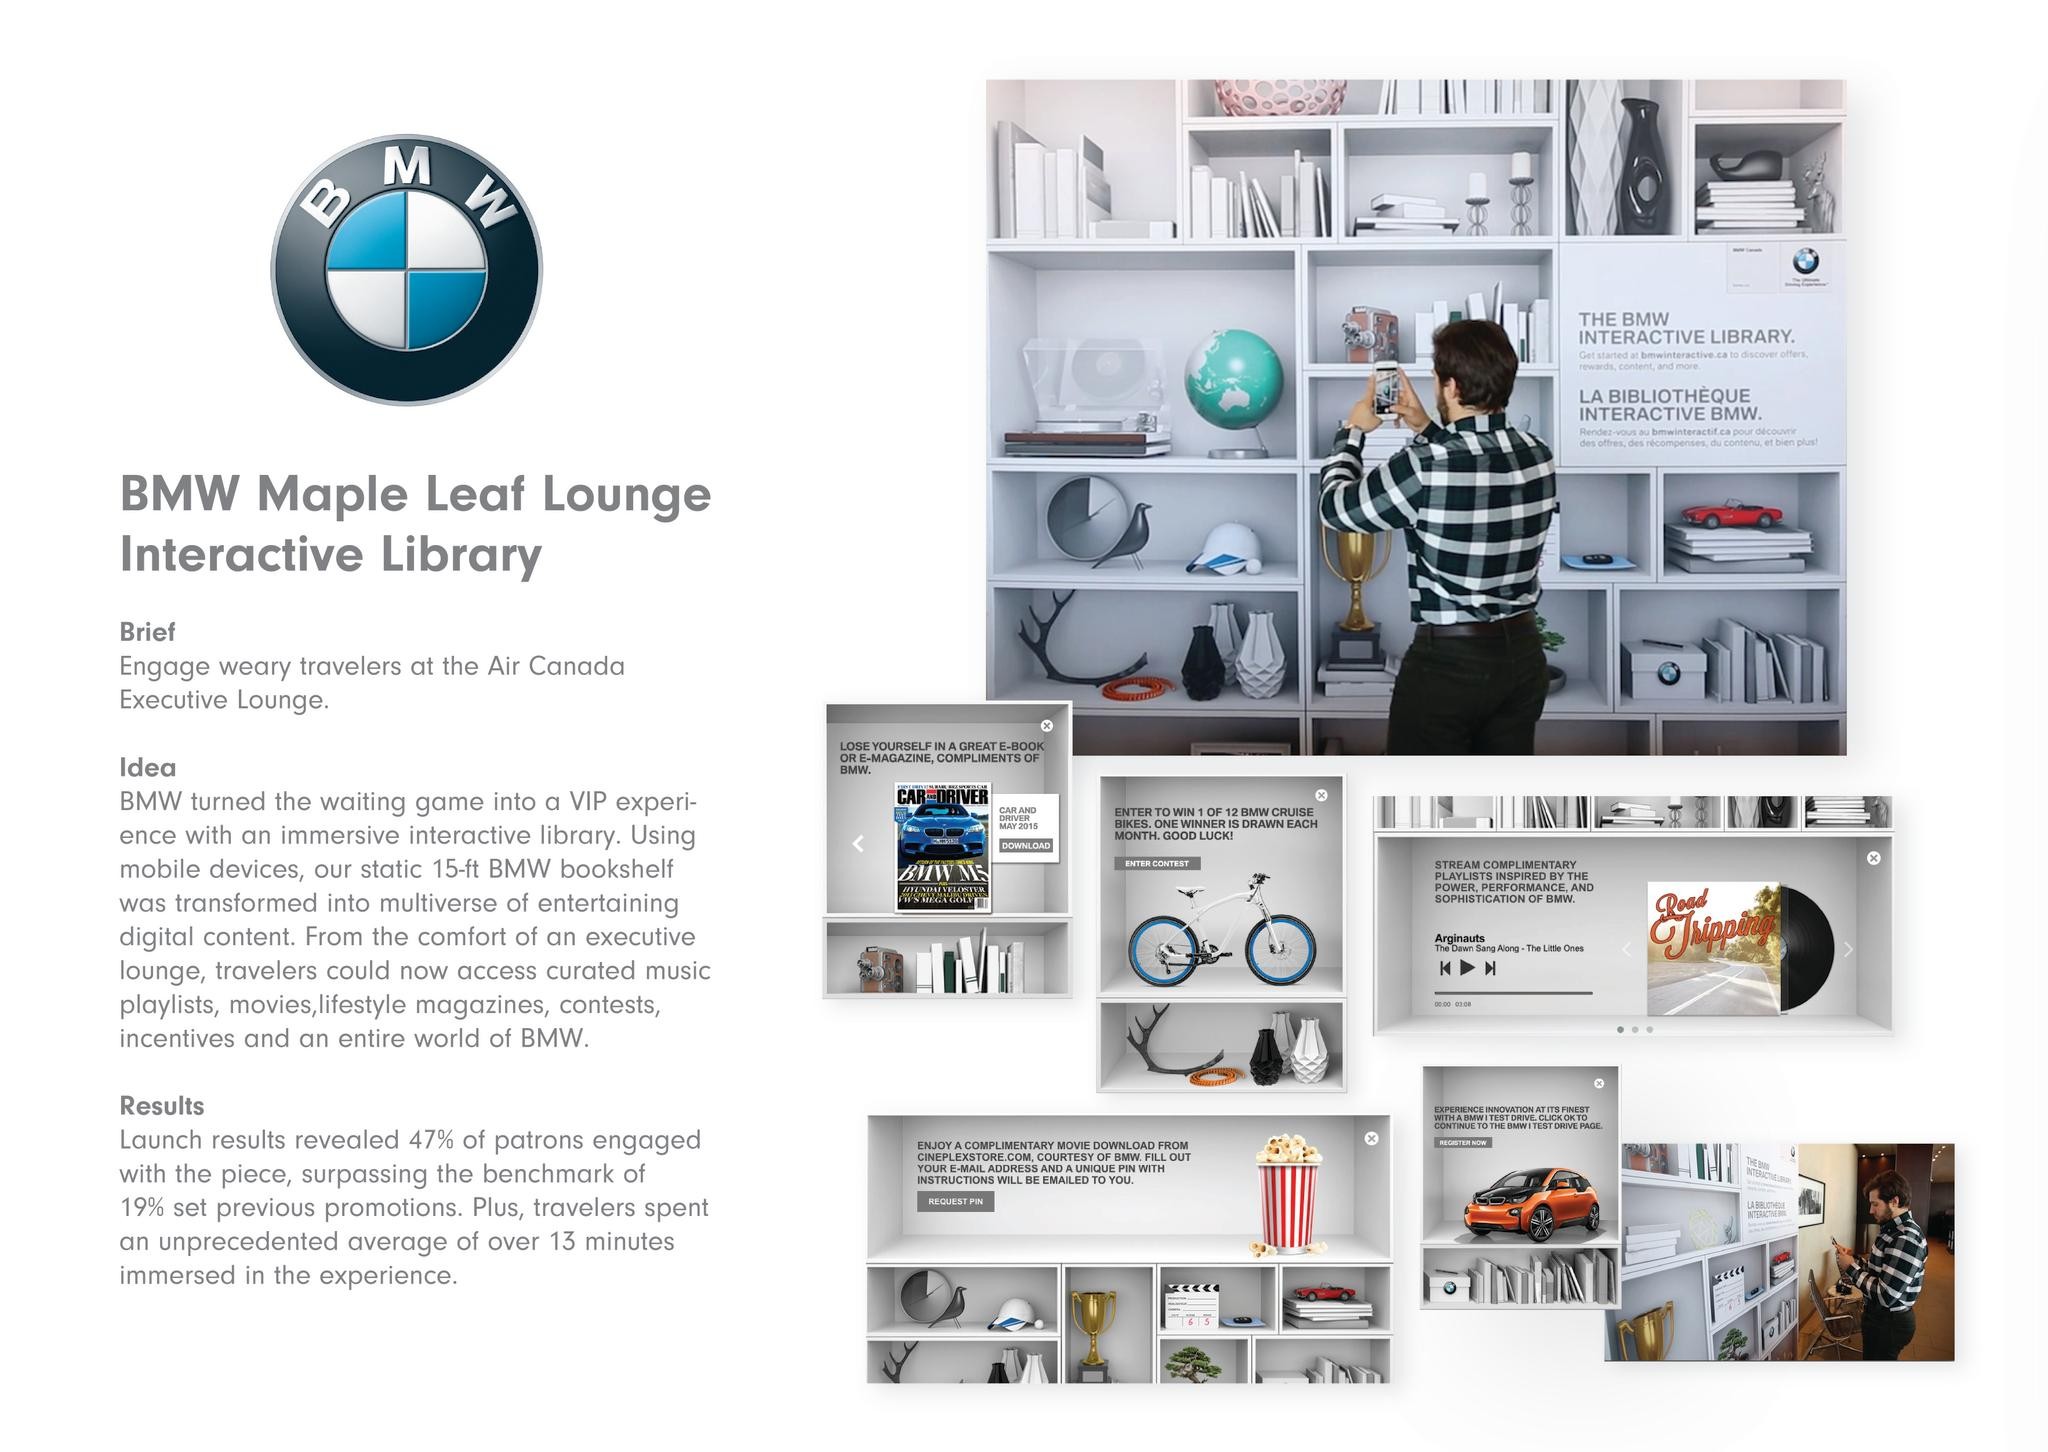 BMW MAPLE LEAF LOUNGE INTERACTIVE LIBRARY